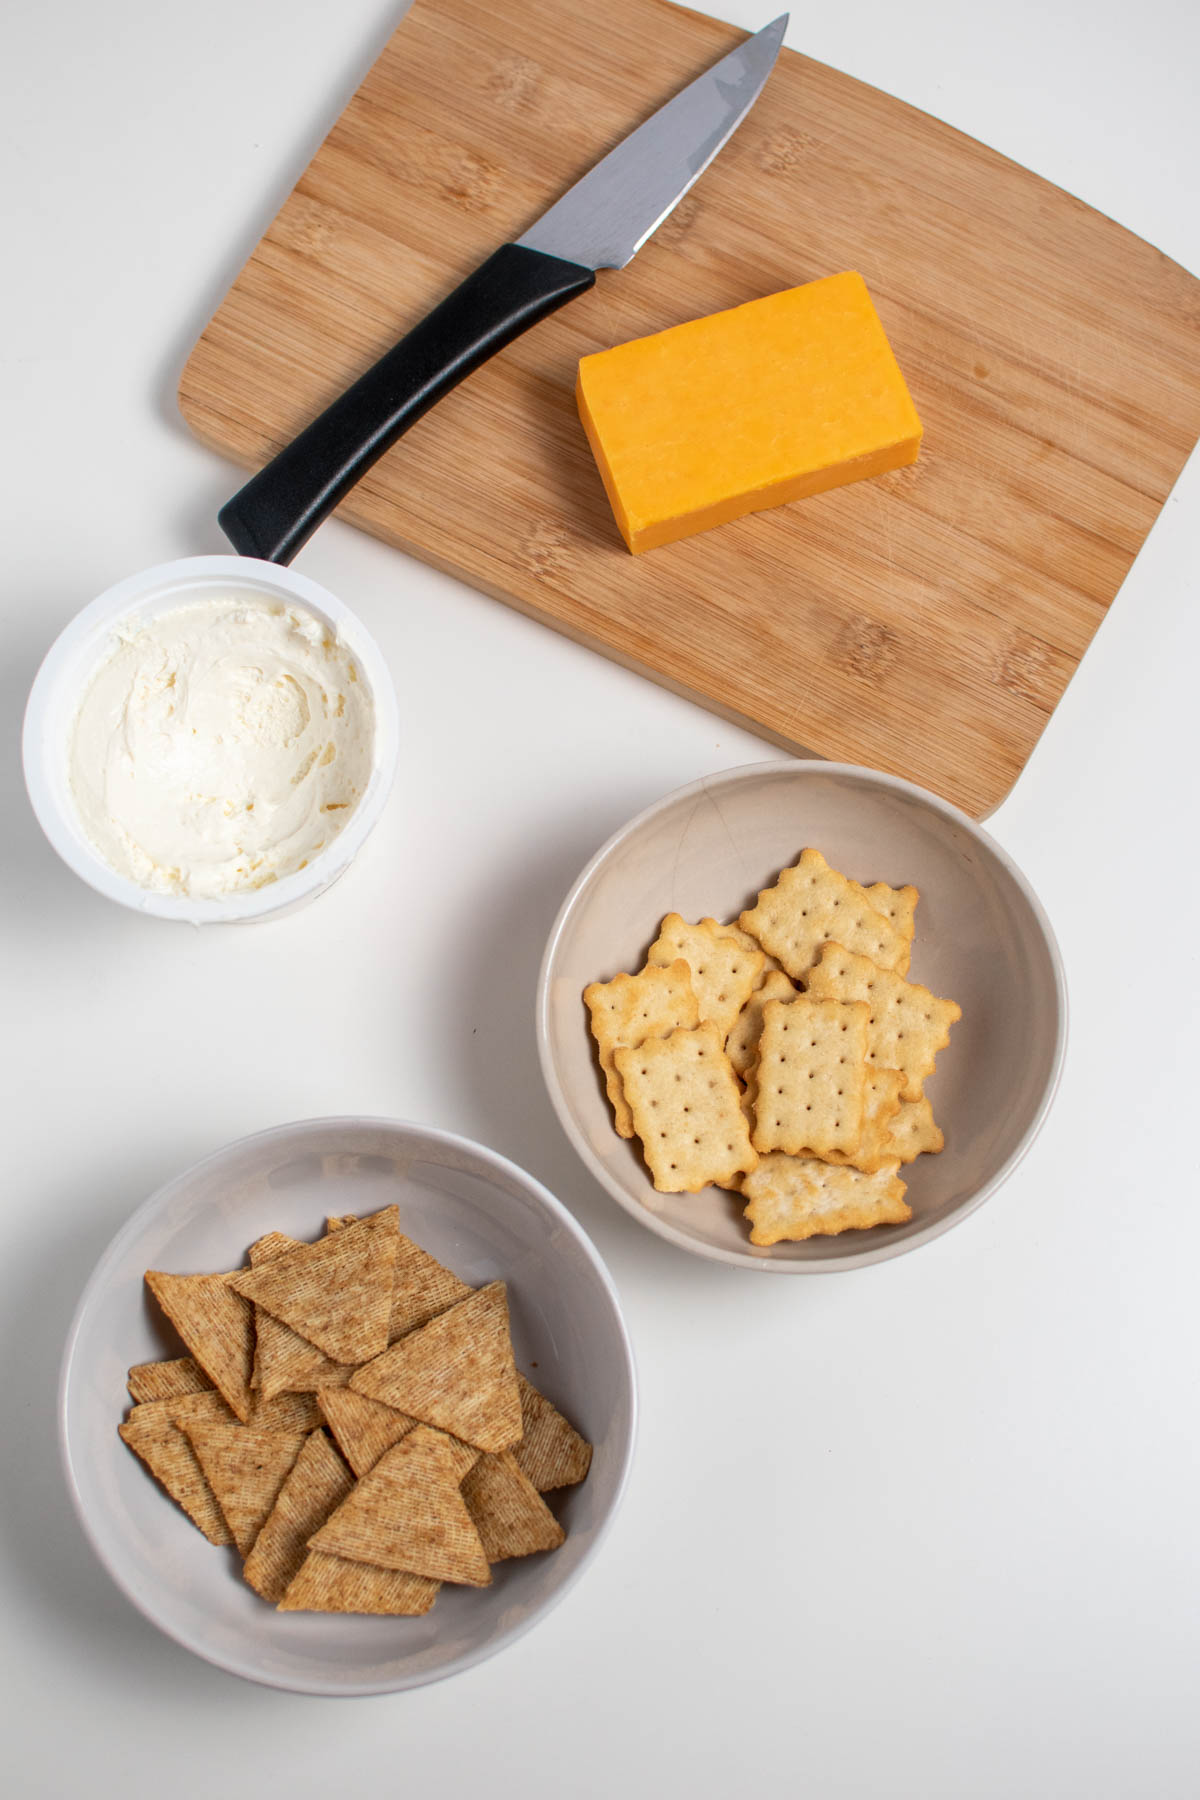 Pumpkin pie appetizer ingredients on table including cheese, crackers, and cream cheese.